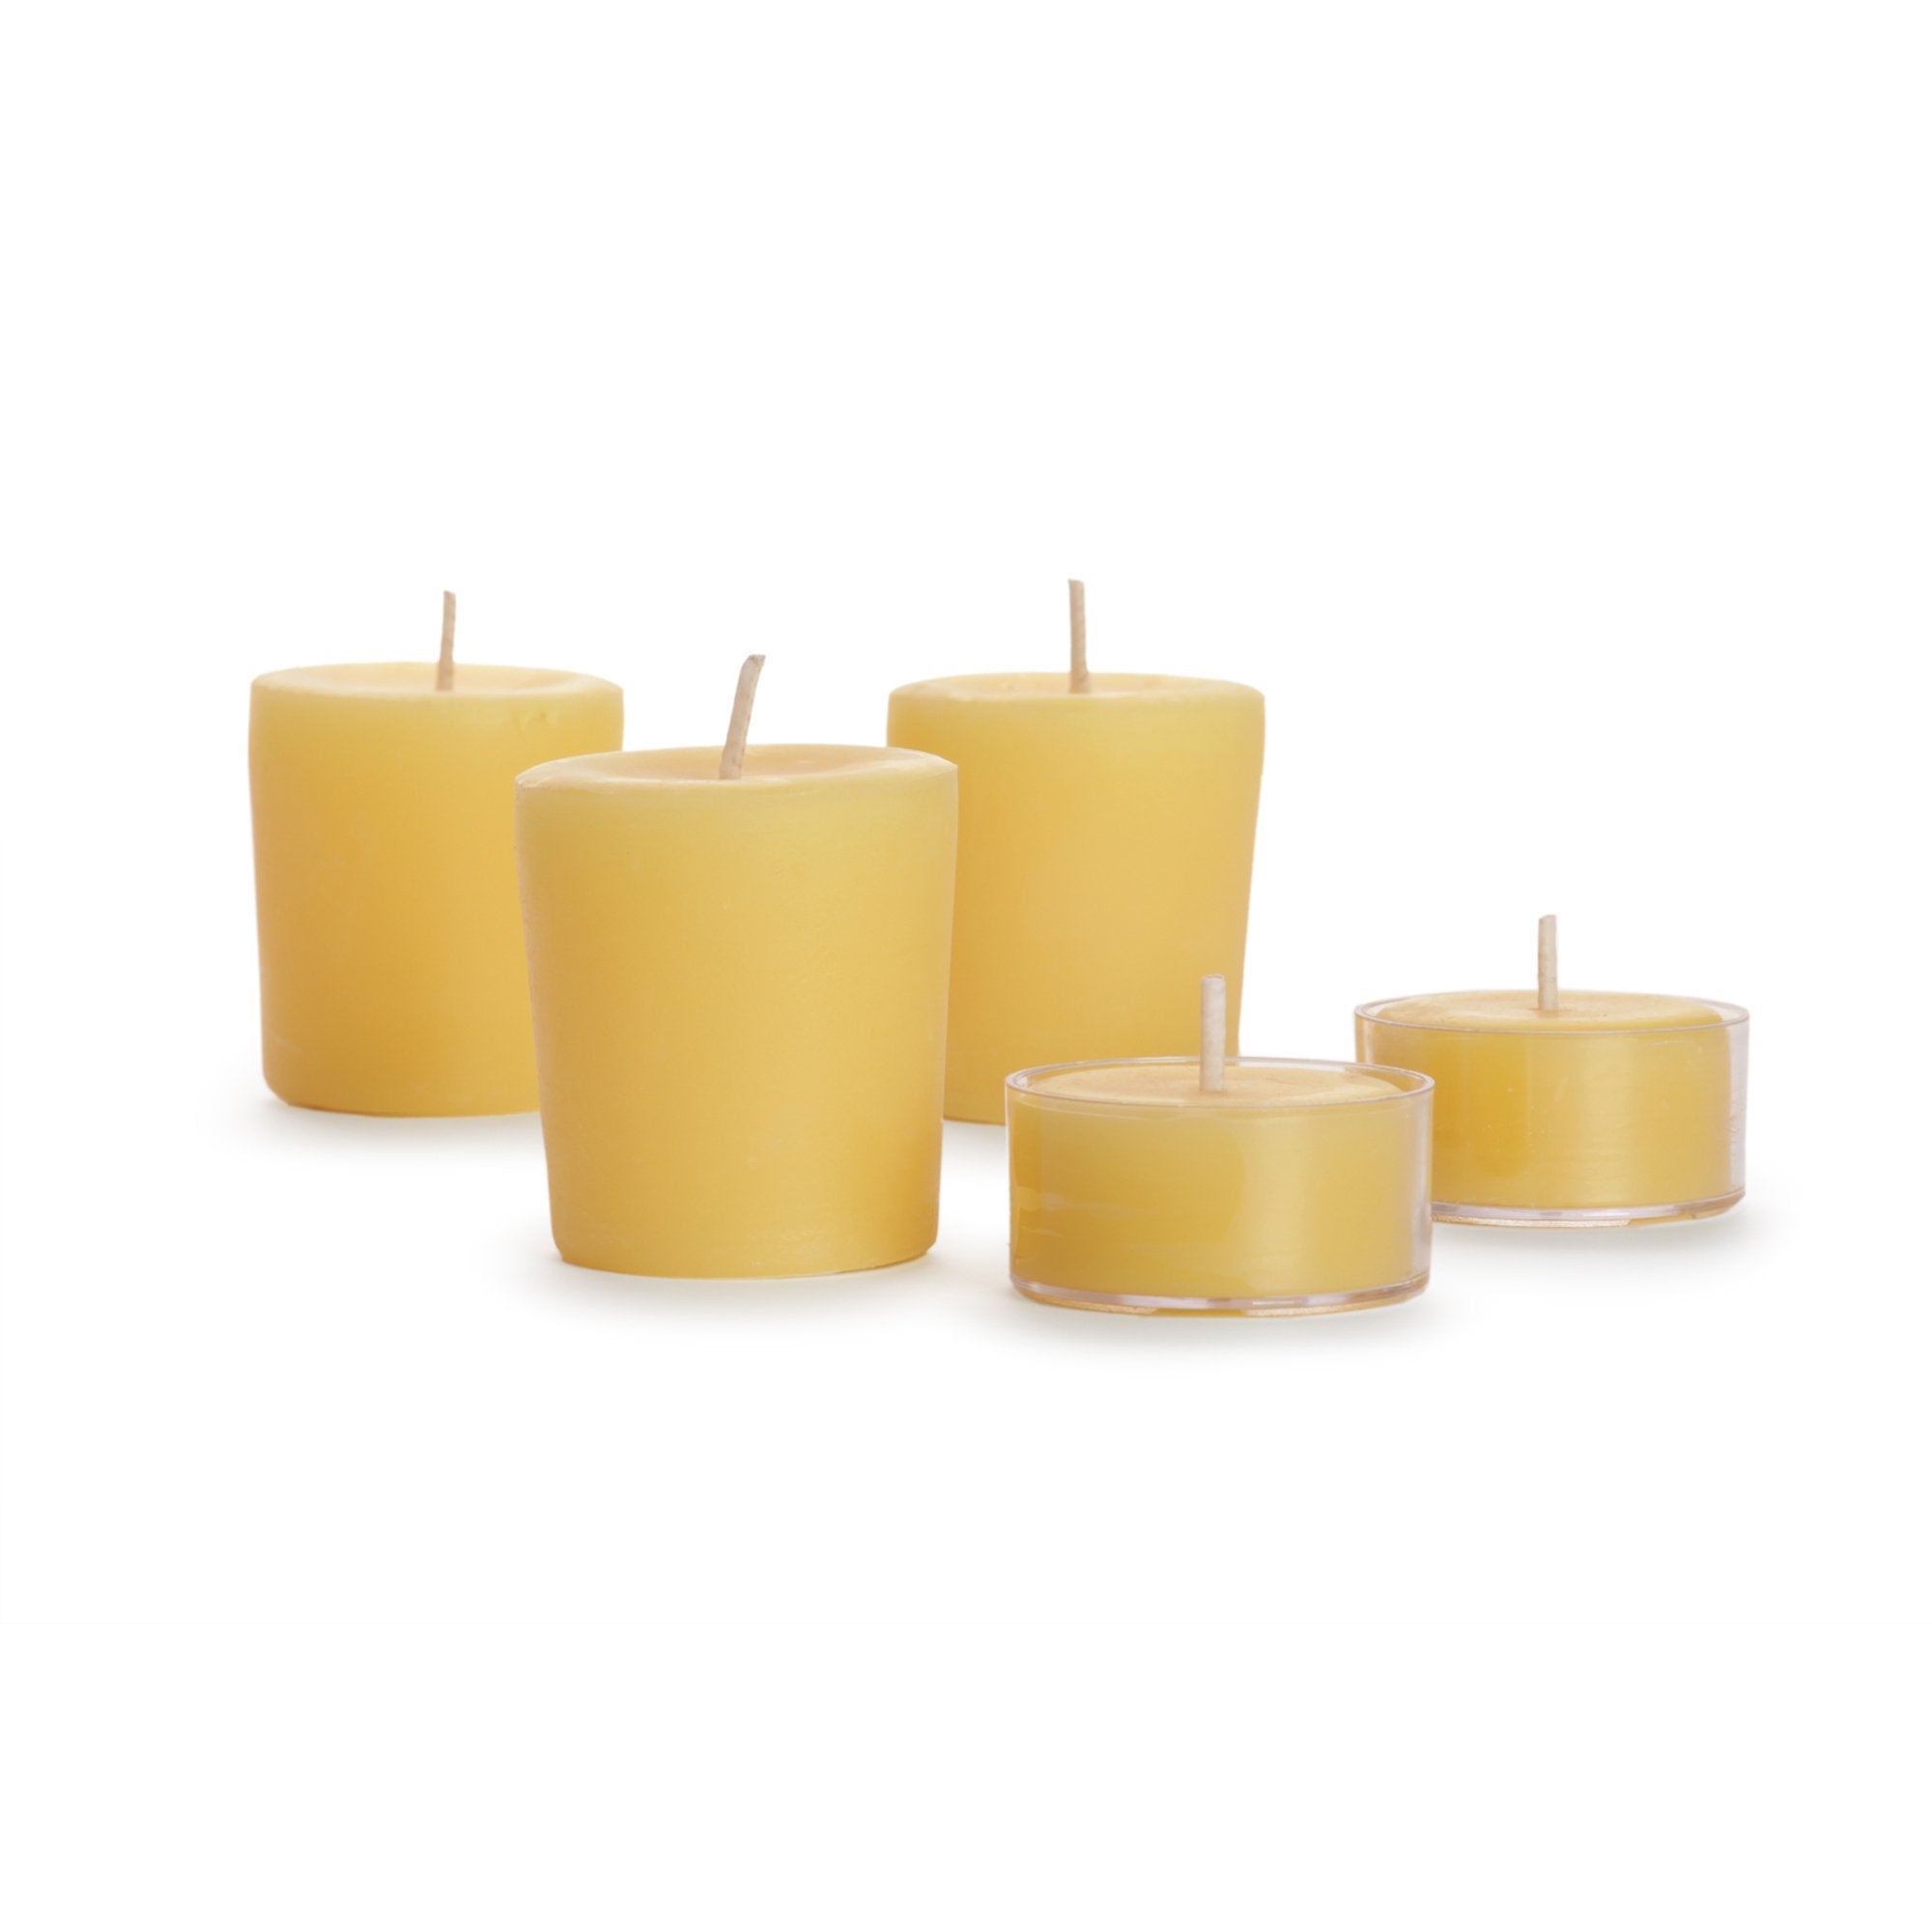 Set of 5 glass tea lights. various shapes, naturally colored and aromatic, infused with the sweet, subtle scent of honey. 